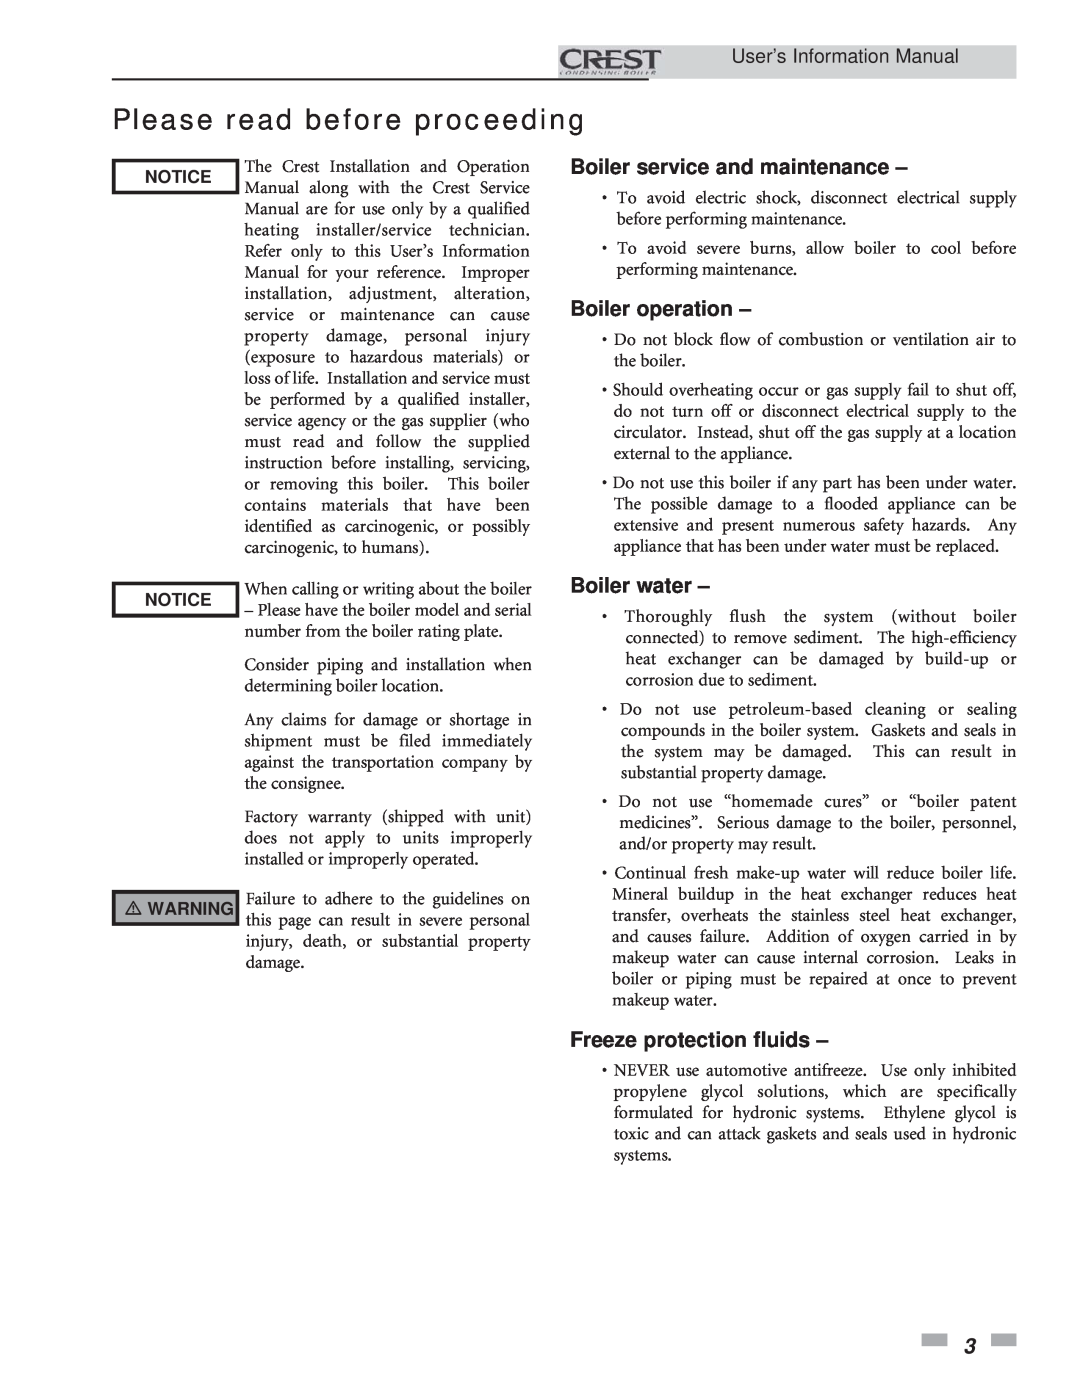 Lochinvar 1.5 manual Please read before proceeding, Boiler service and maintenance, Boiler operation, Boiler water 